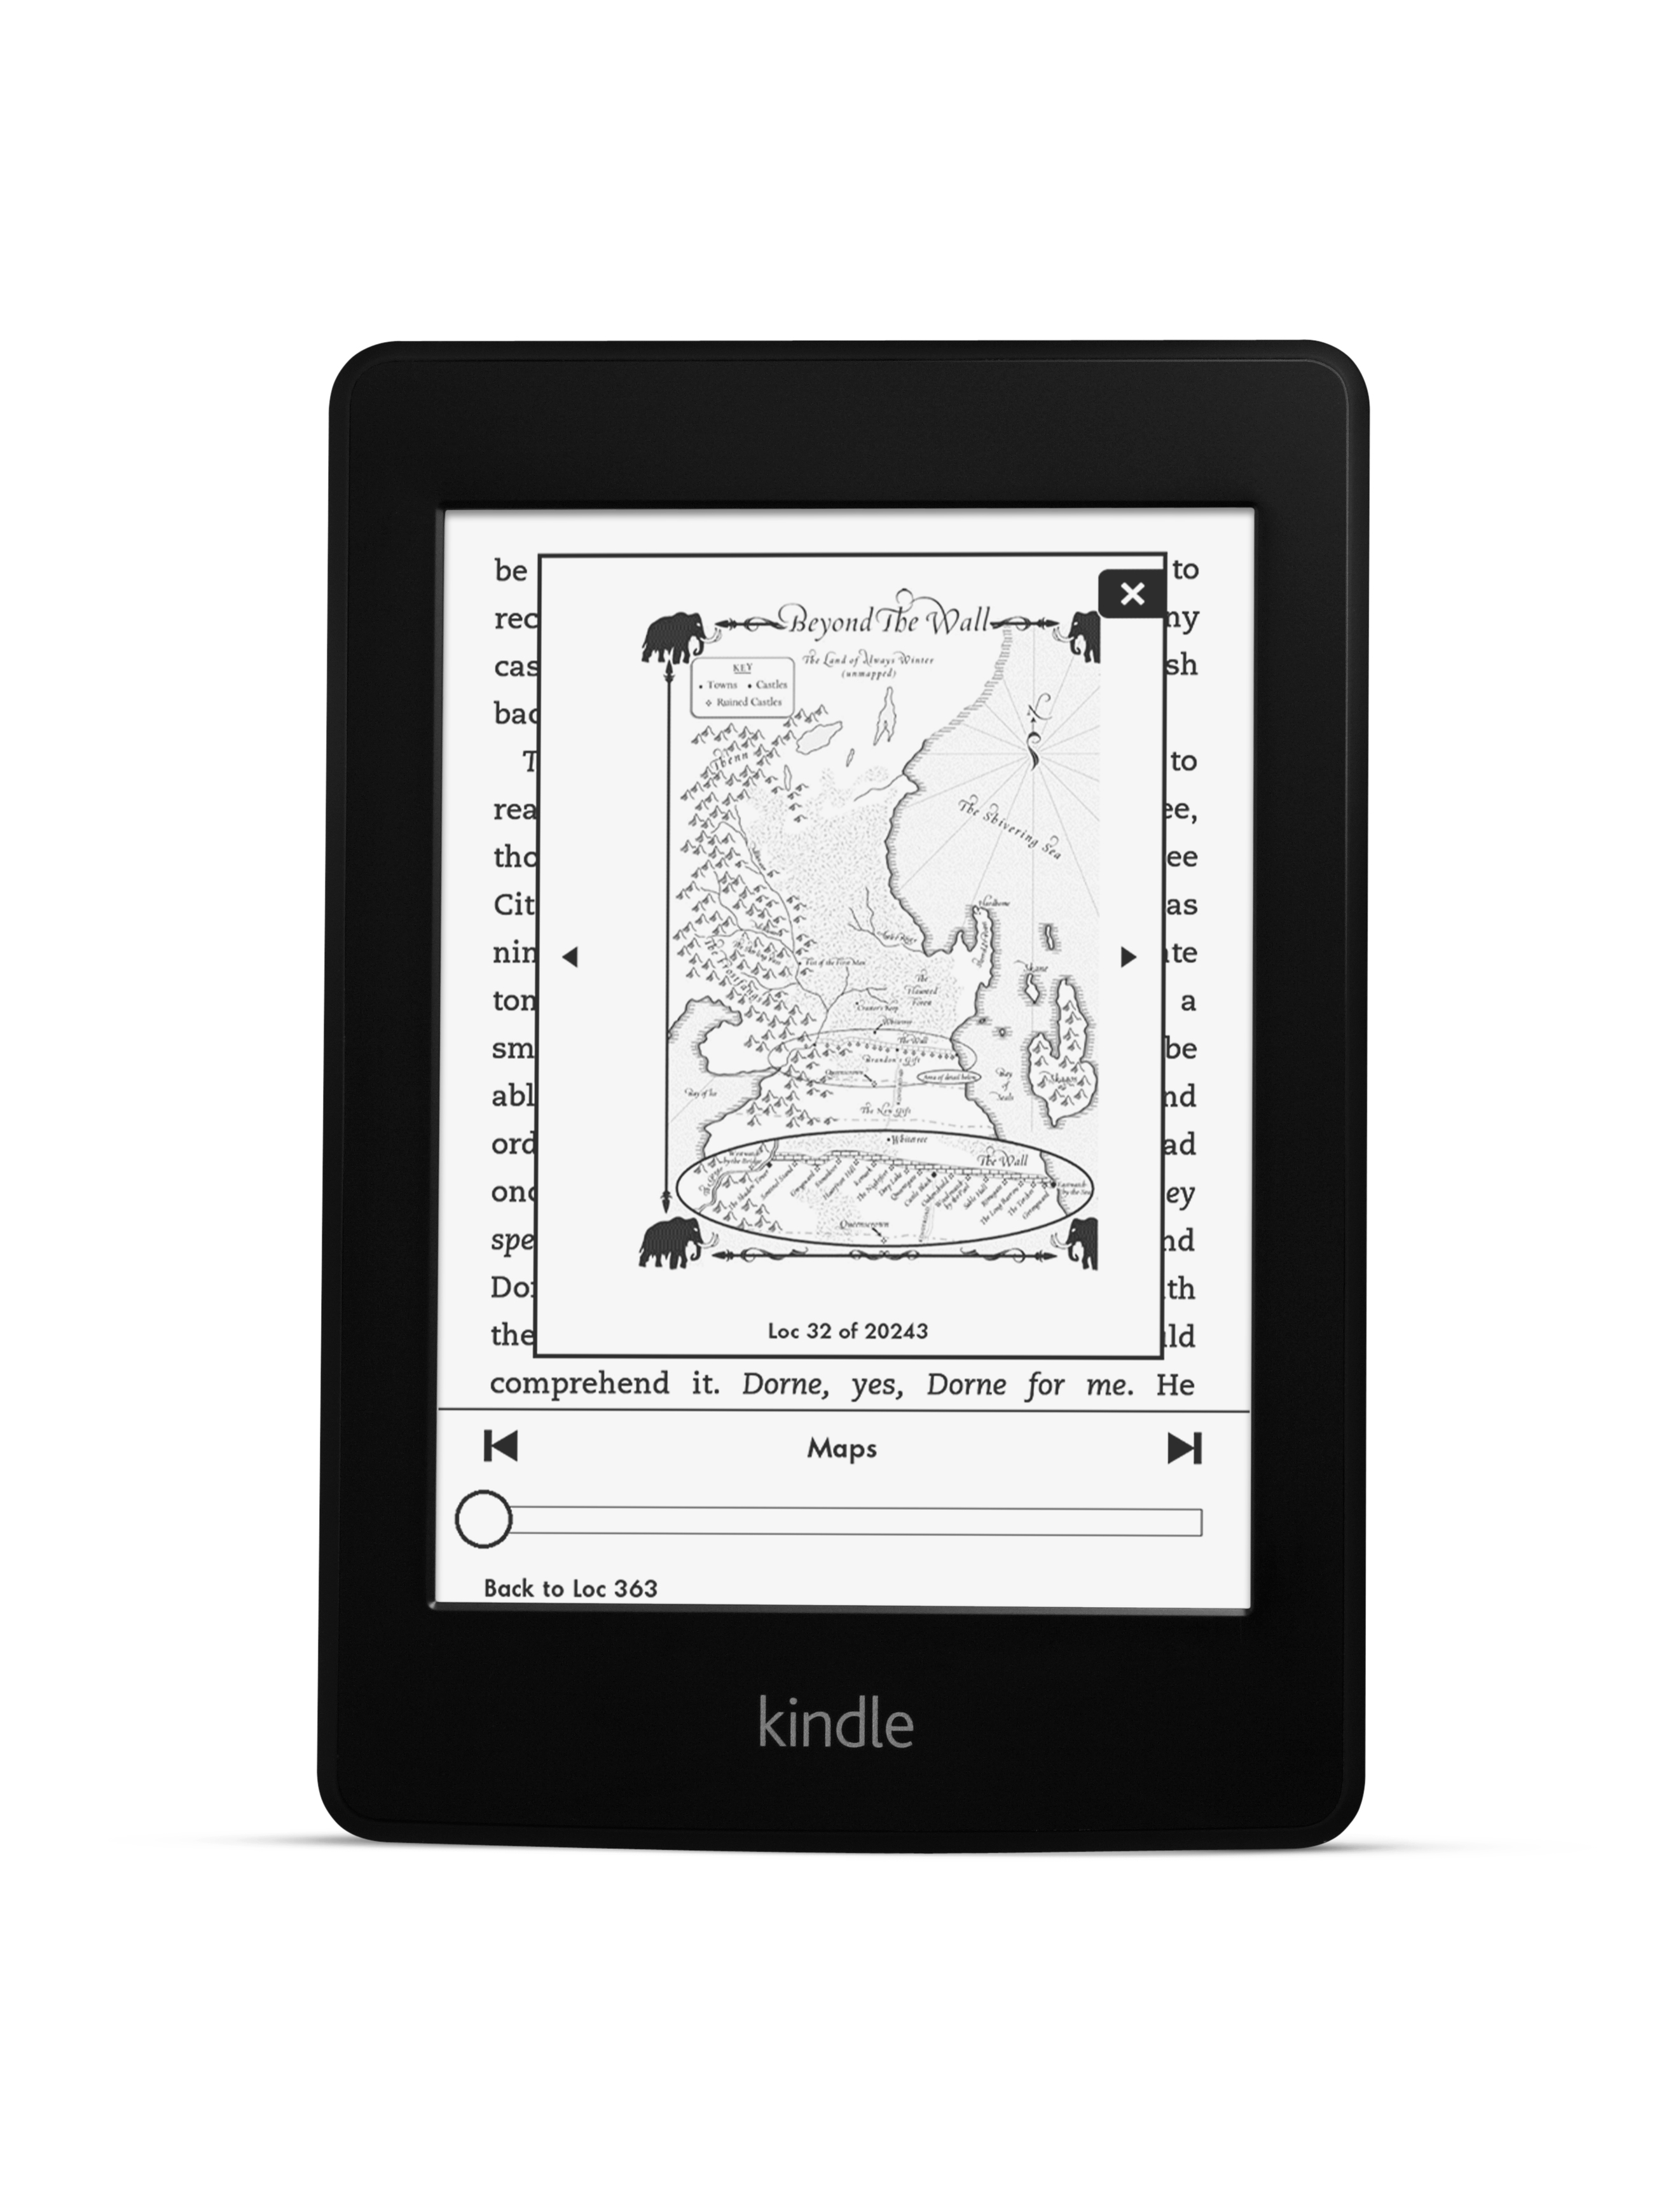 6th Gen Kindle Paperwhite is for book lovers - BusinessToday